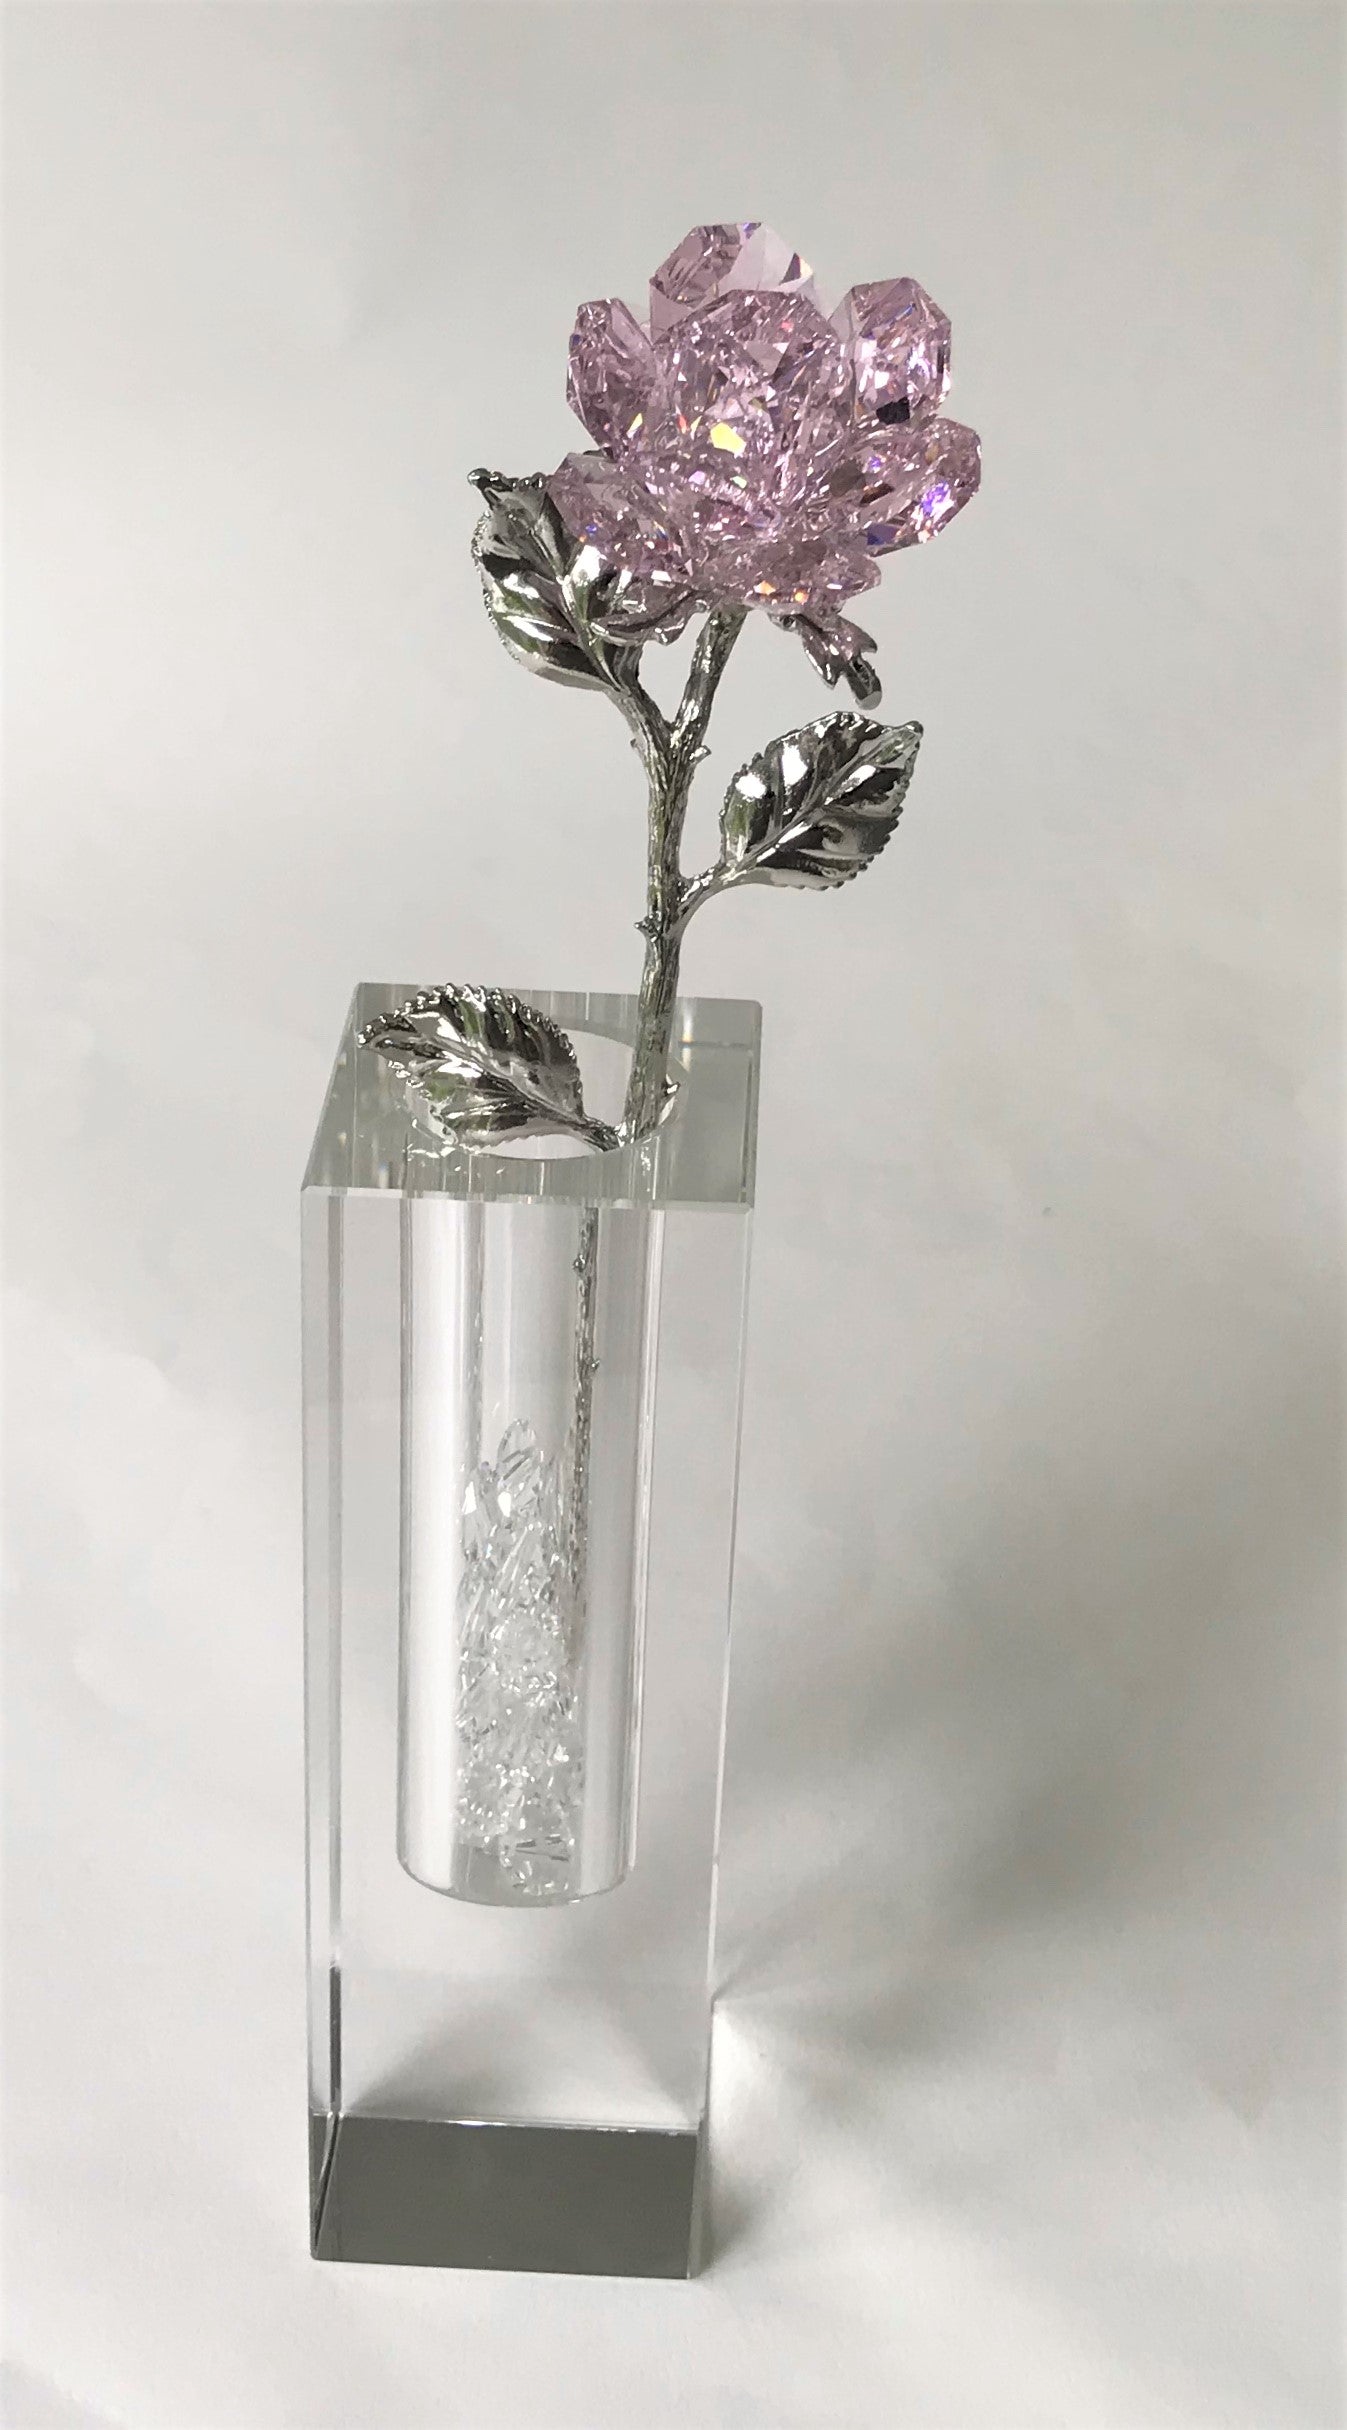 Pink Crystal Rose Handcrafted By Bjcrystalgifts Using Swarovski Crystals In A Crystal Vase